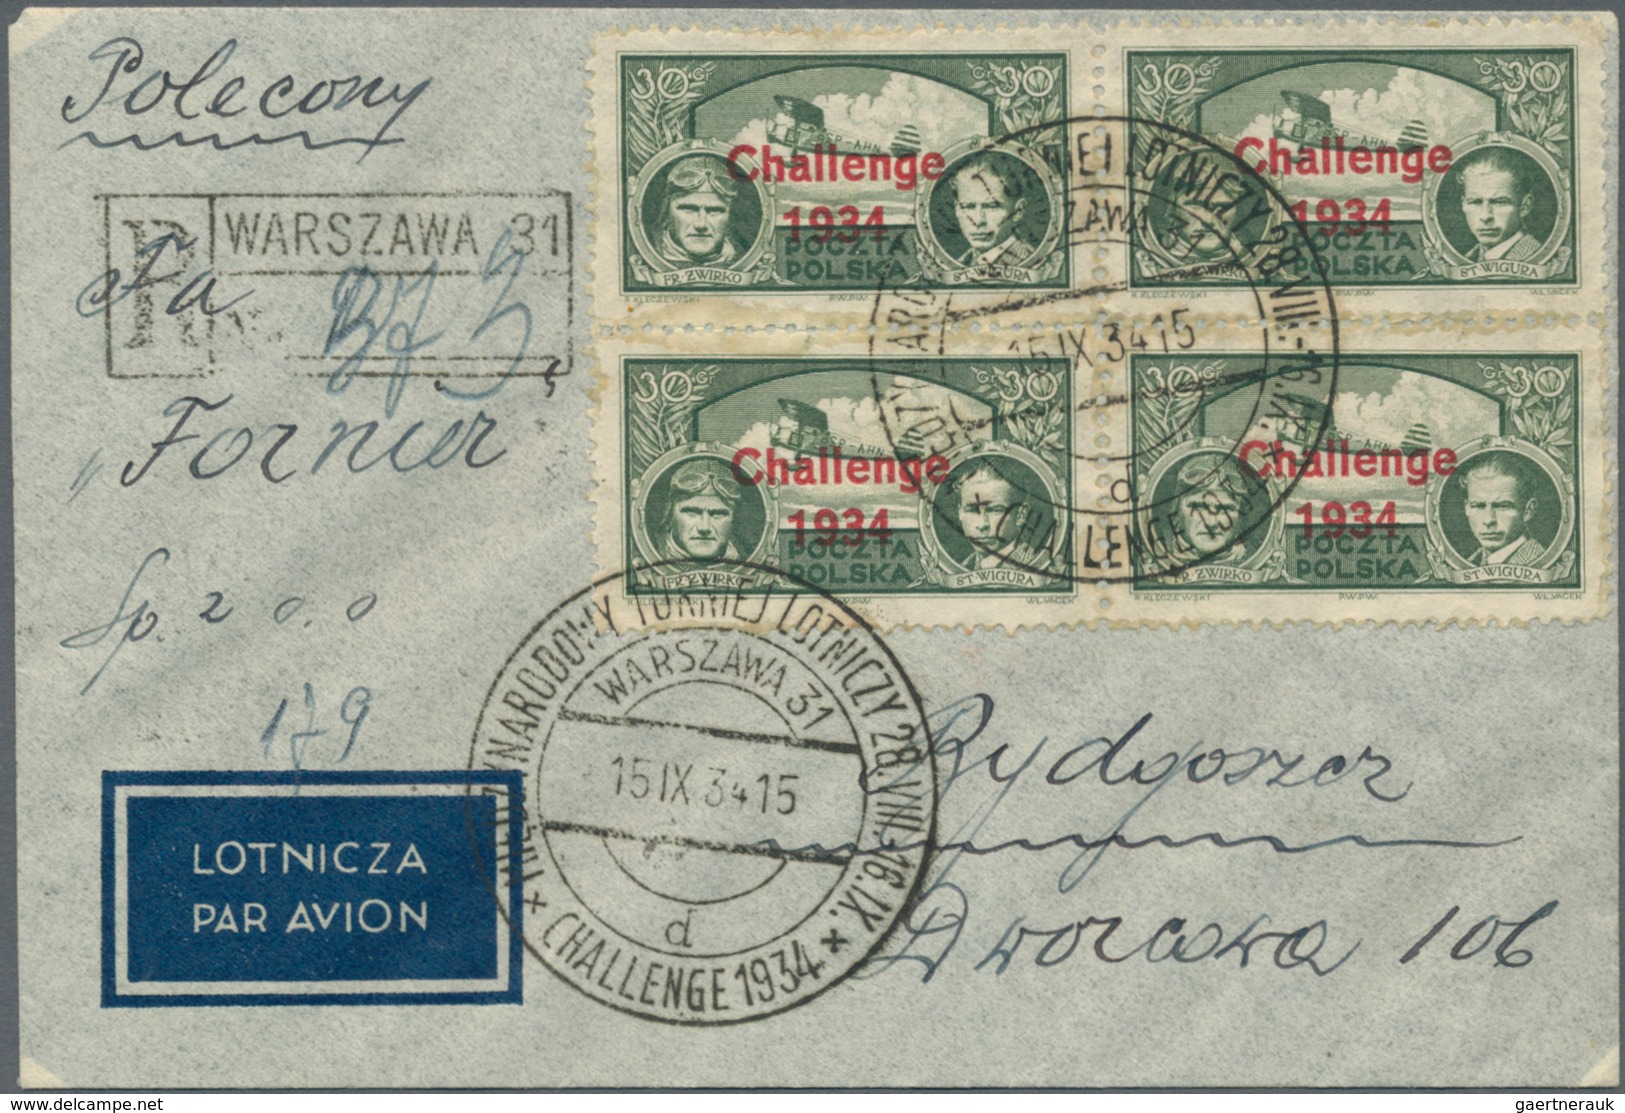 Flugpost Europa: 1934, Two Airmail Covers Franked With 20 And 30 Gr. Airmail Surcharged "CHALLENGE 1 - Andere-Europa